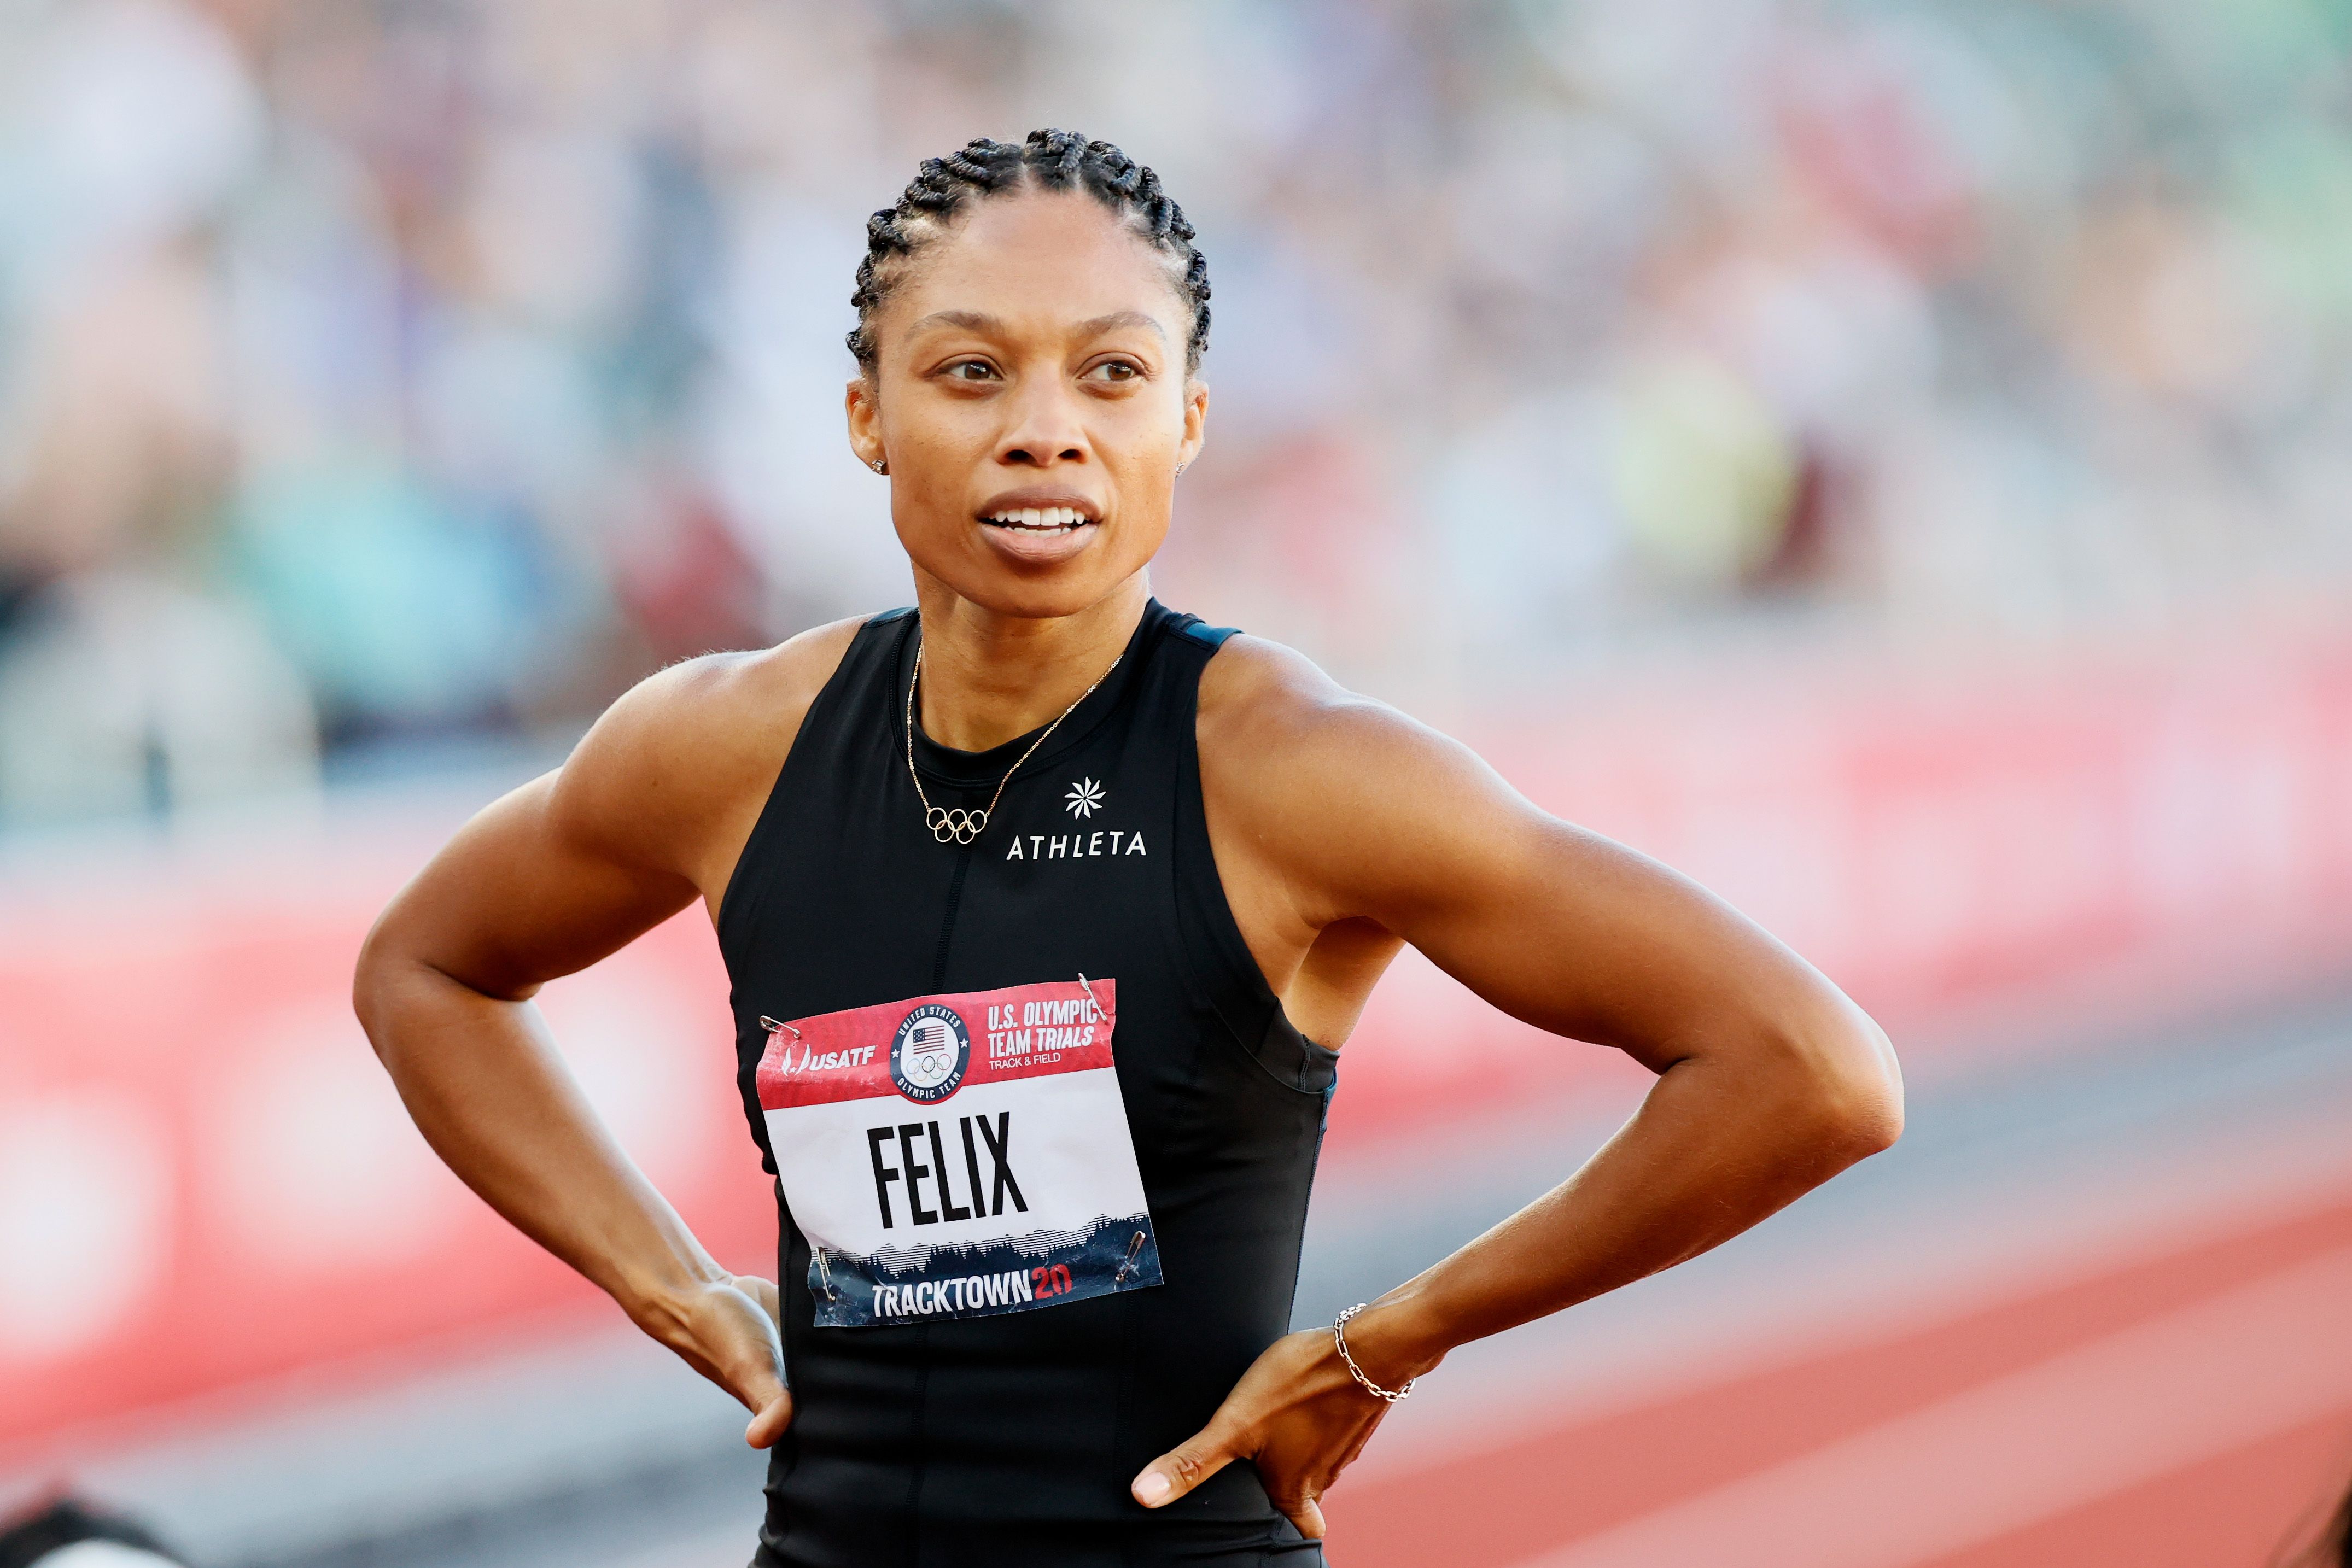 Allyson Felix's 'comeback' at the World Athletics Championships exemplified  the class of her storied career